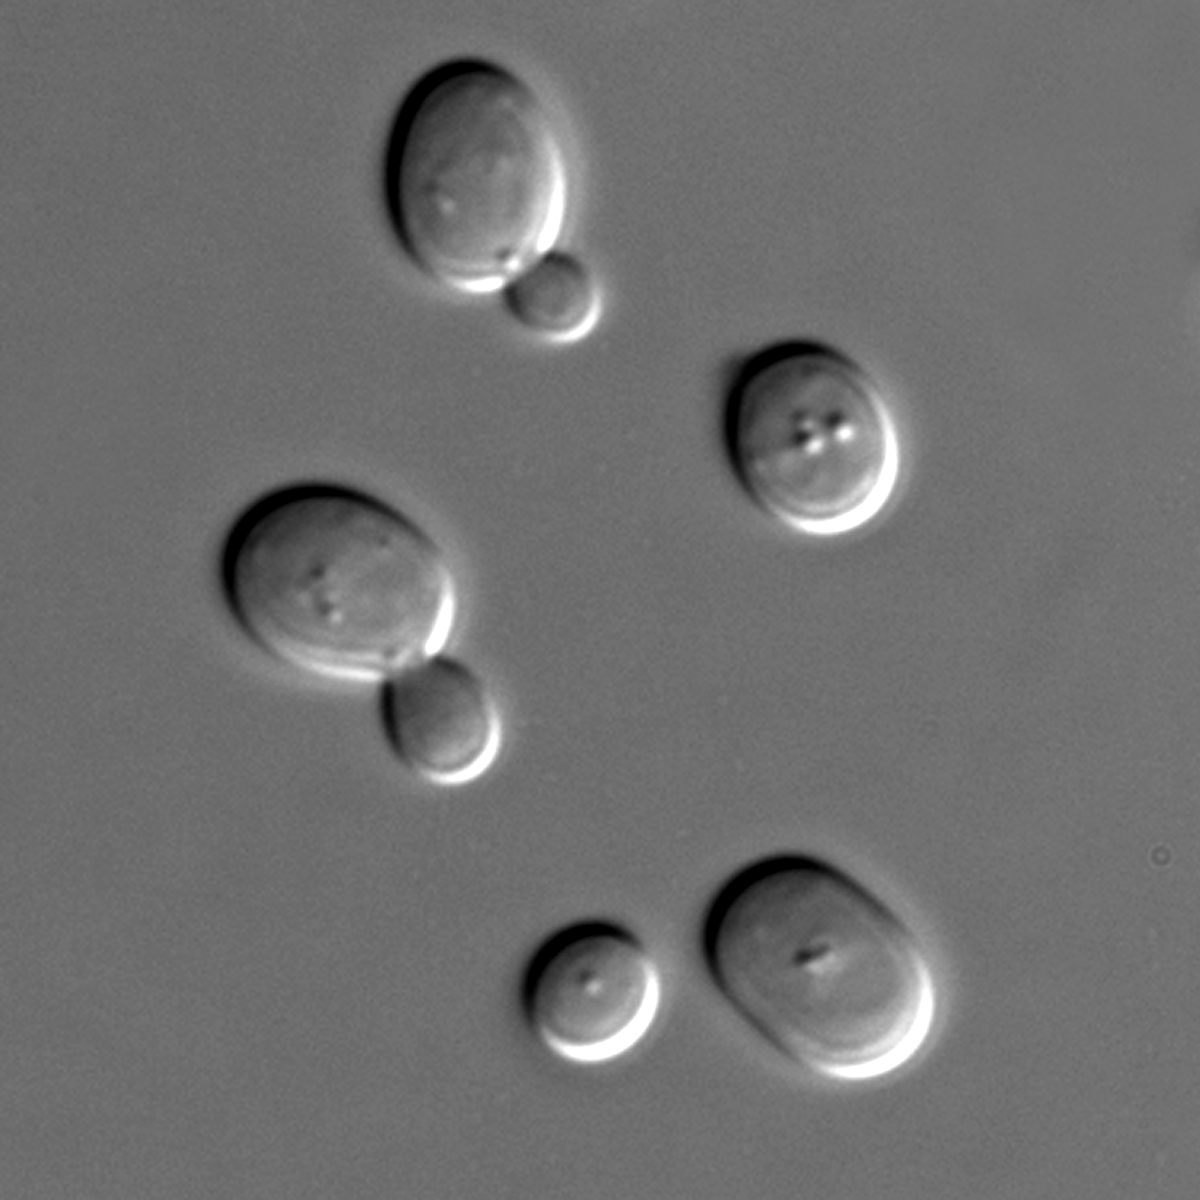 Tiny yeast cells helped Giorgini and colleagues find proteins that protect cells from the mutant huntingtin protein.  